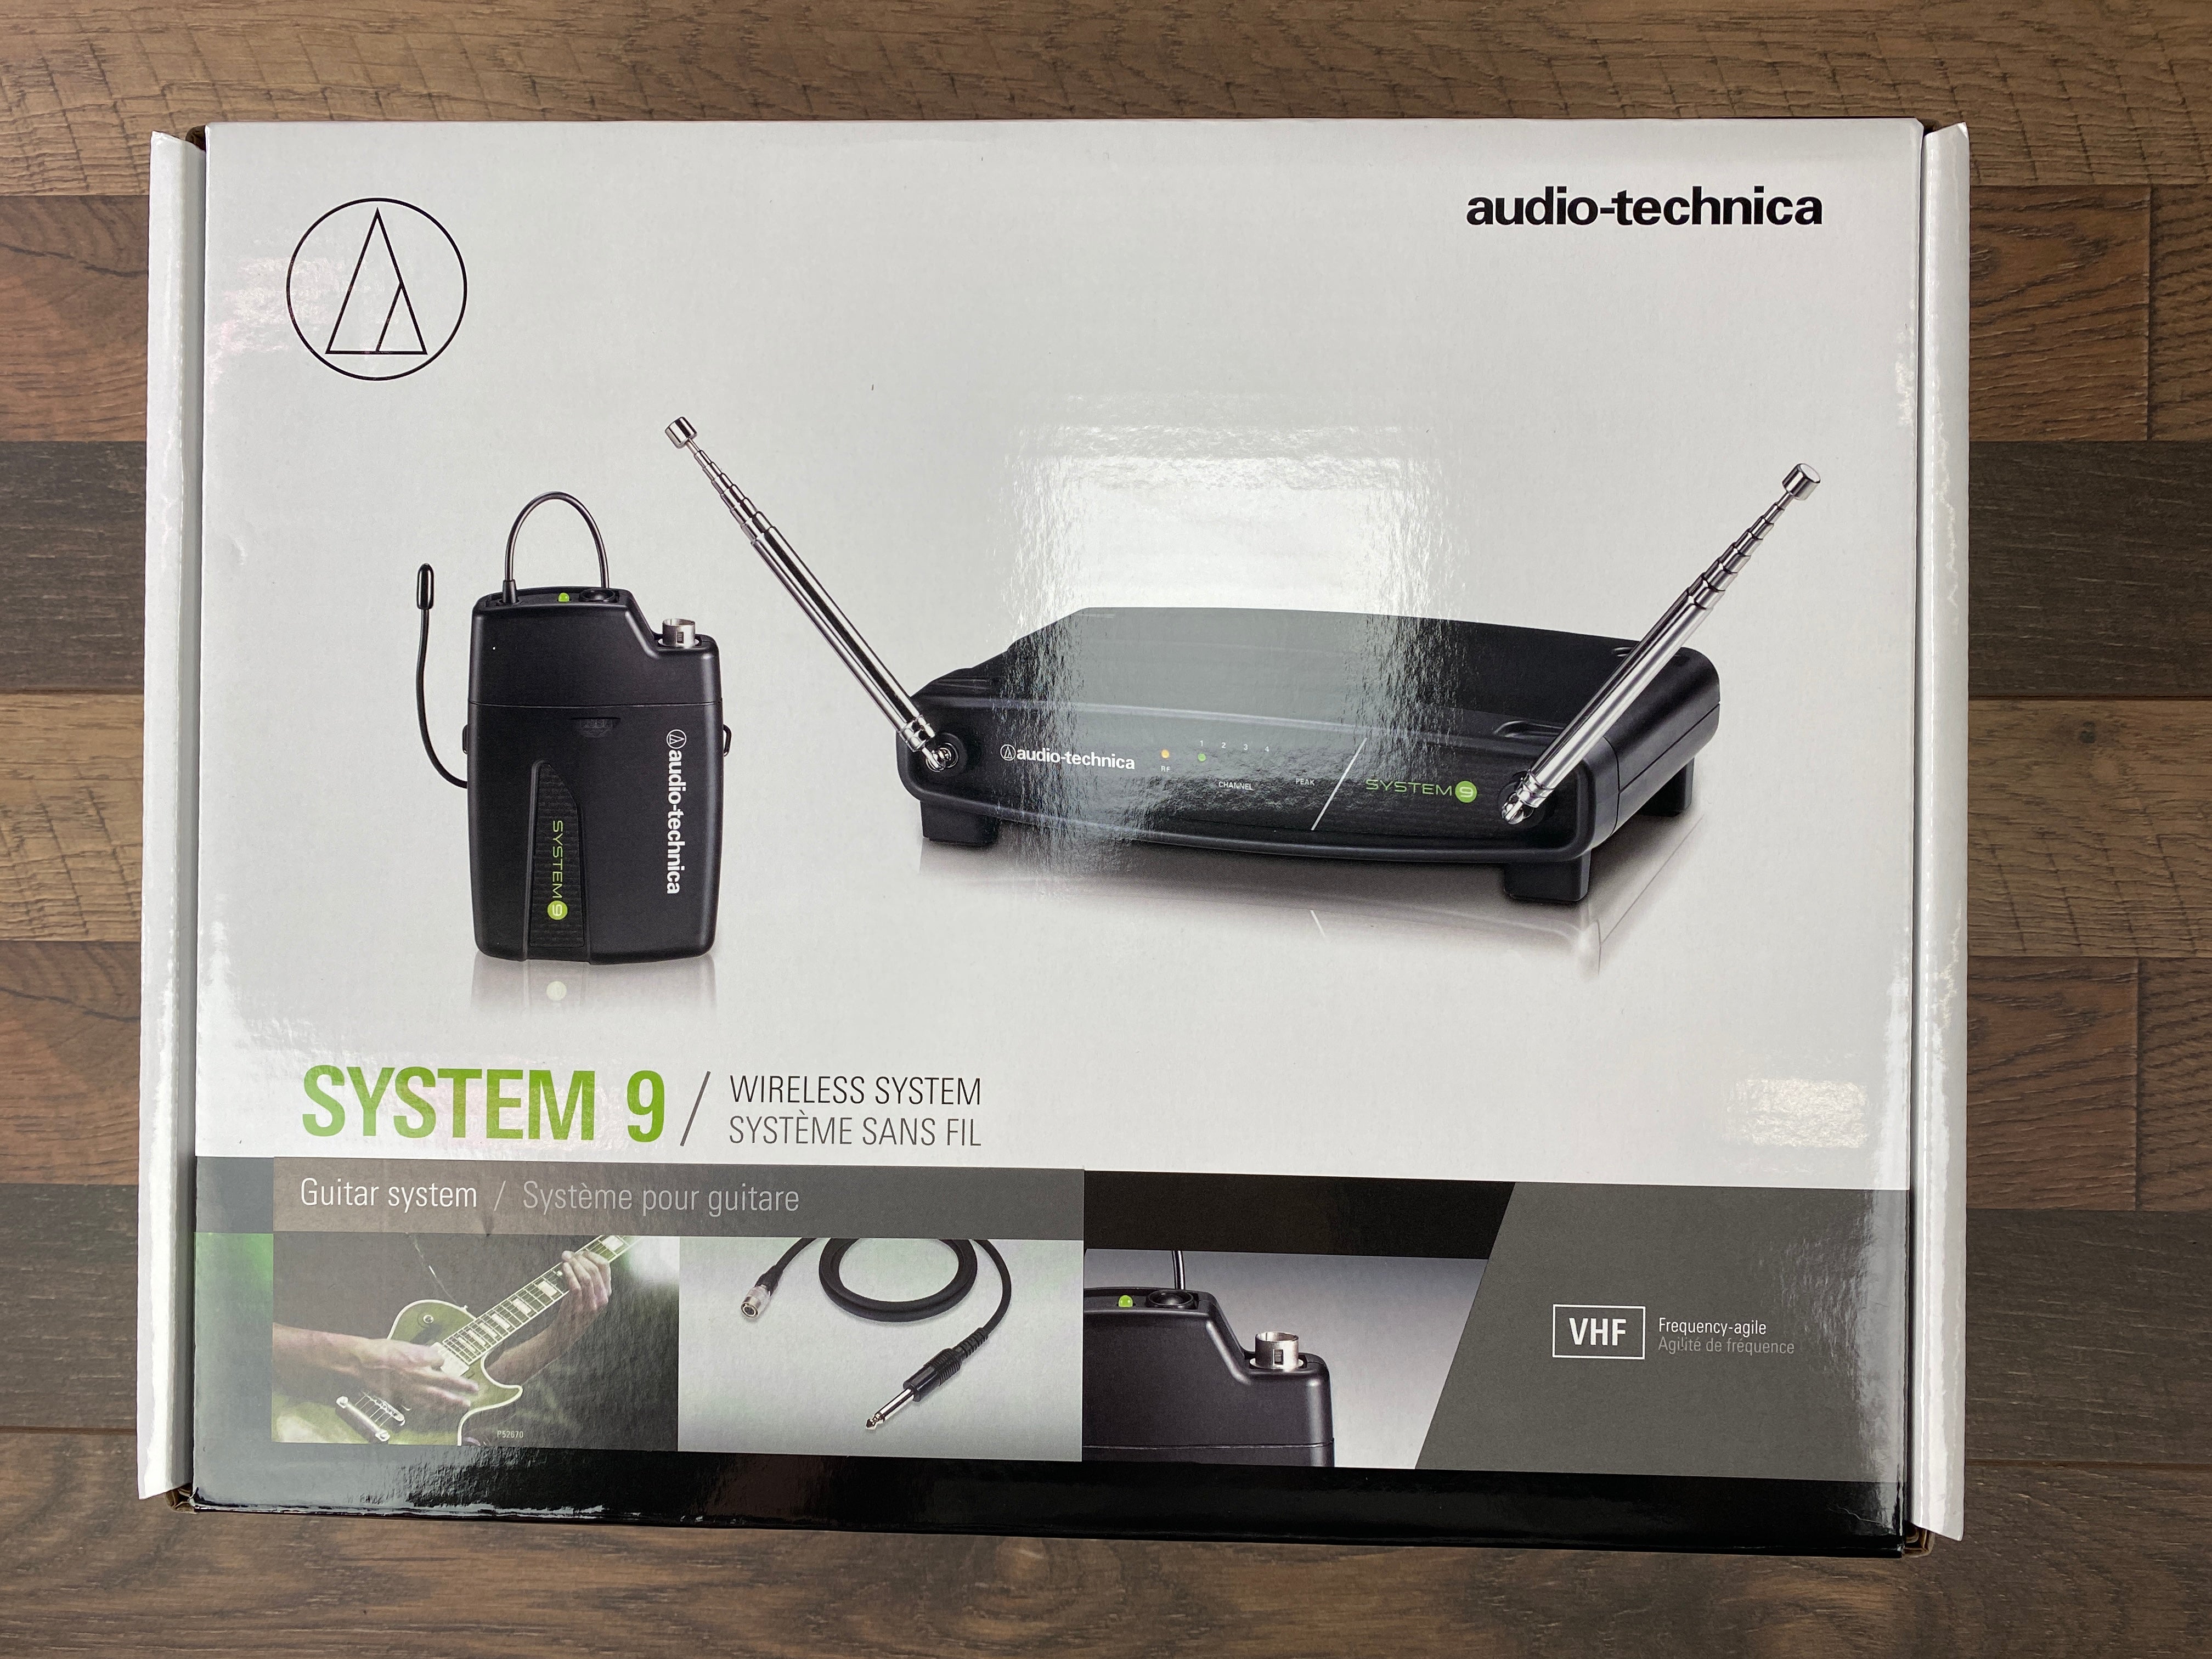 Audio Technica ATW-901a/G 4 Channel Frequency Agile Guitar Wireless System